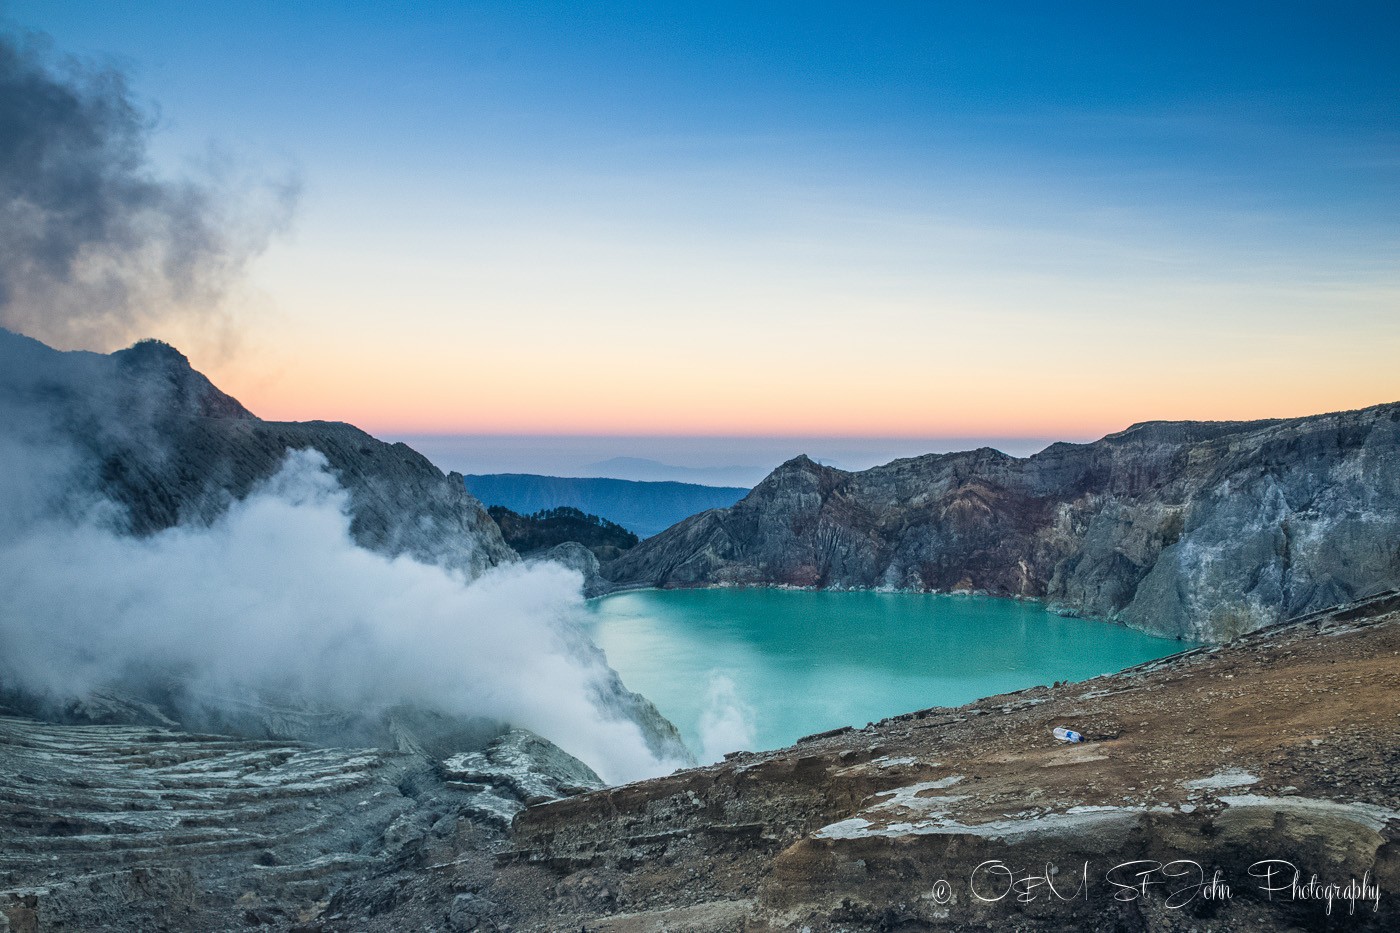 A Hike to the Heart of the Ijen Crater: Chasing the Blue Flame